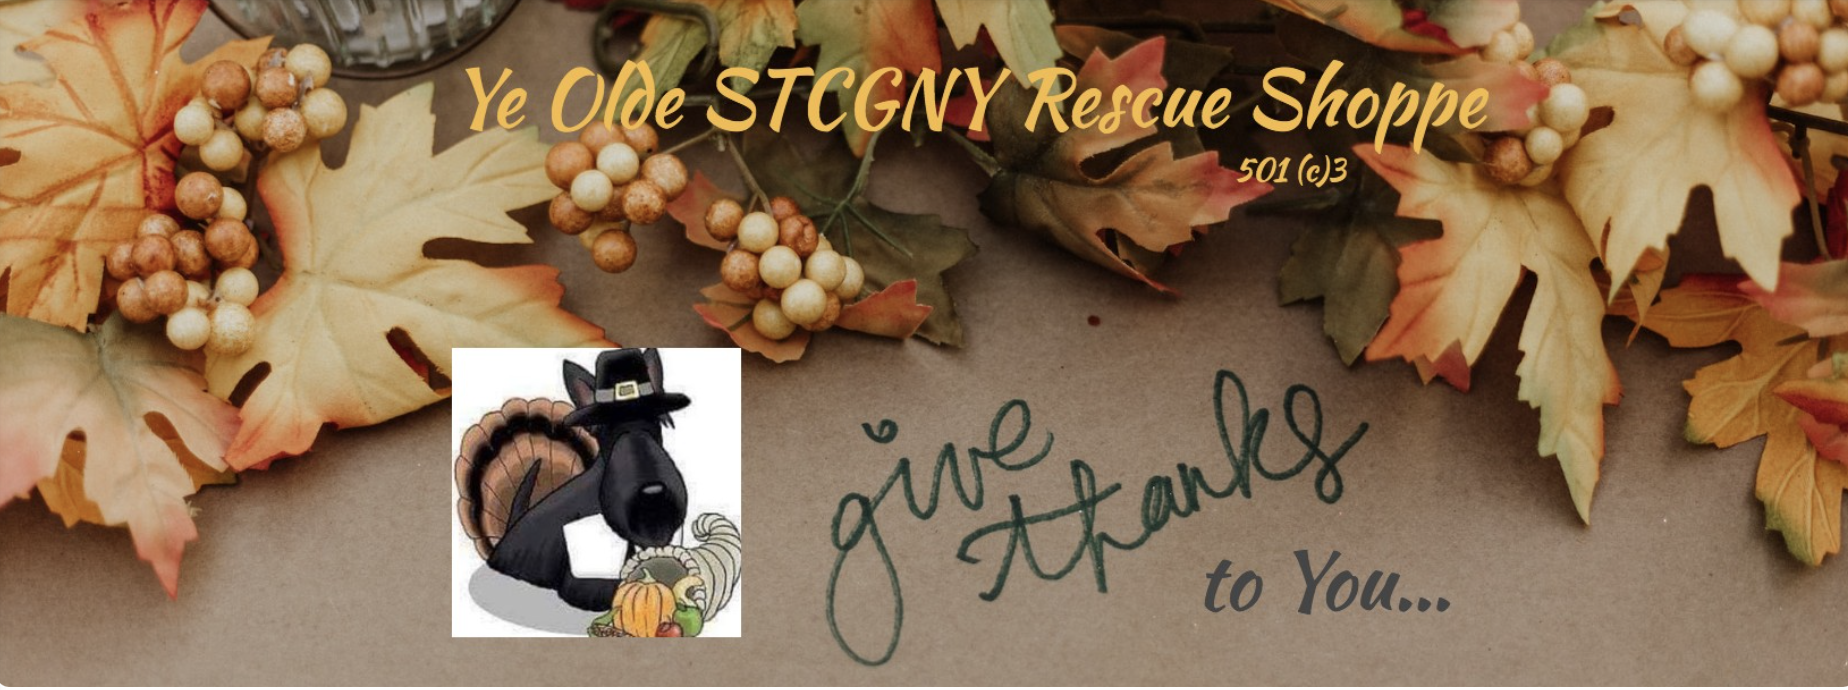 HEader for Facebook group for STCGY rescue